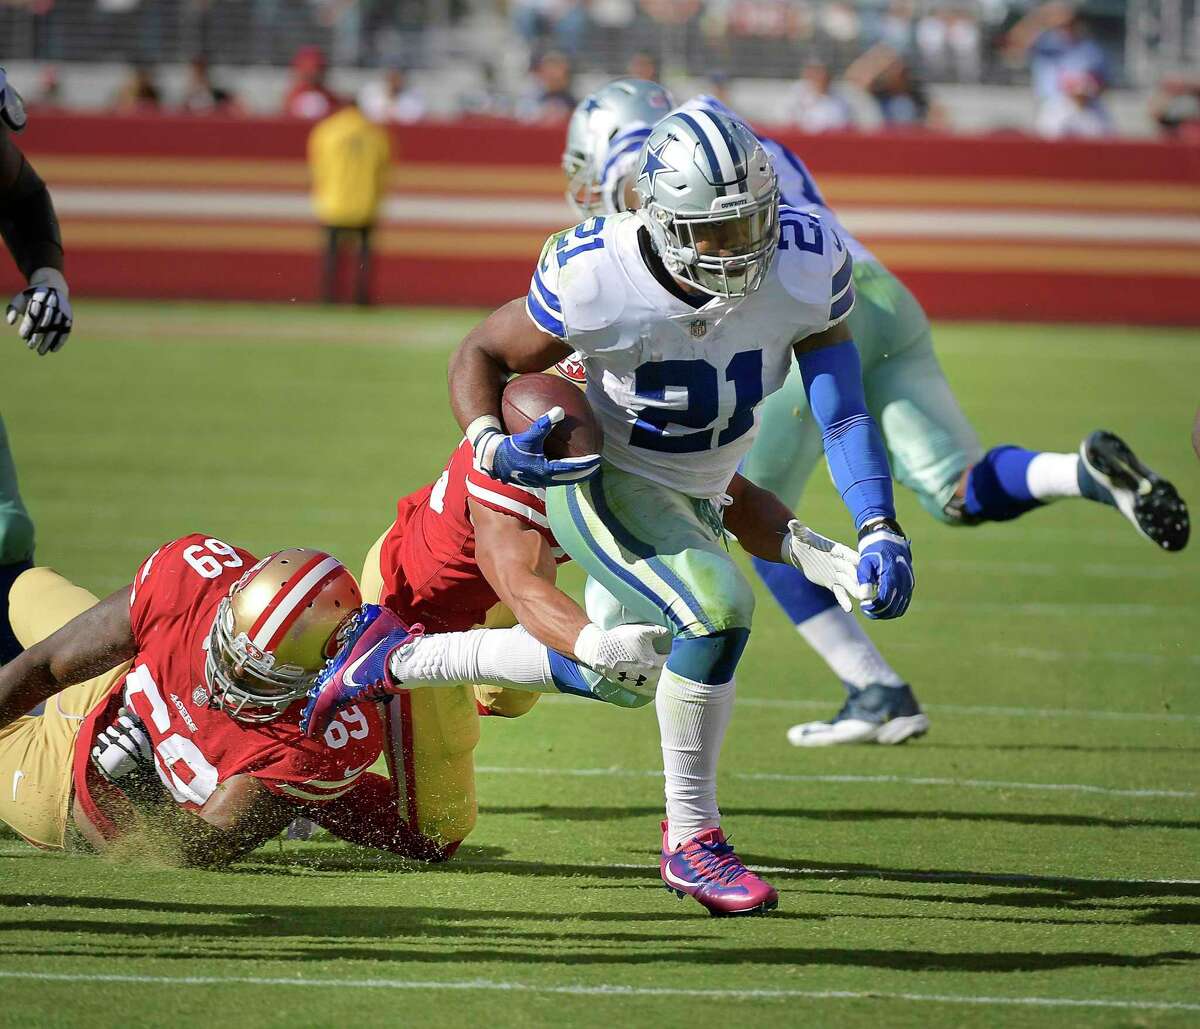 Dallas Cowboys running back Ezekiel Elliott (21) picks up another first down as San Francisco 49ers defensive tackle Tony McDaniel (69) and strong safety Eric Reid (35) can't stop him during the fourth quarter as the Cowboys beat the 49ers 40-10 on Sunday, Oct. 22, 2017 at Levi's Stadium in Santa Clara, Calif. (Max Faulkner/Fort Worth Star-Telegram/TNS)